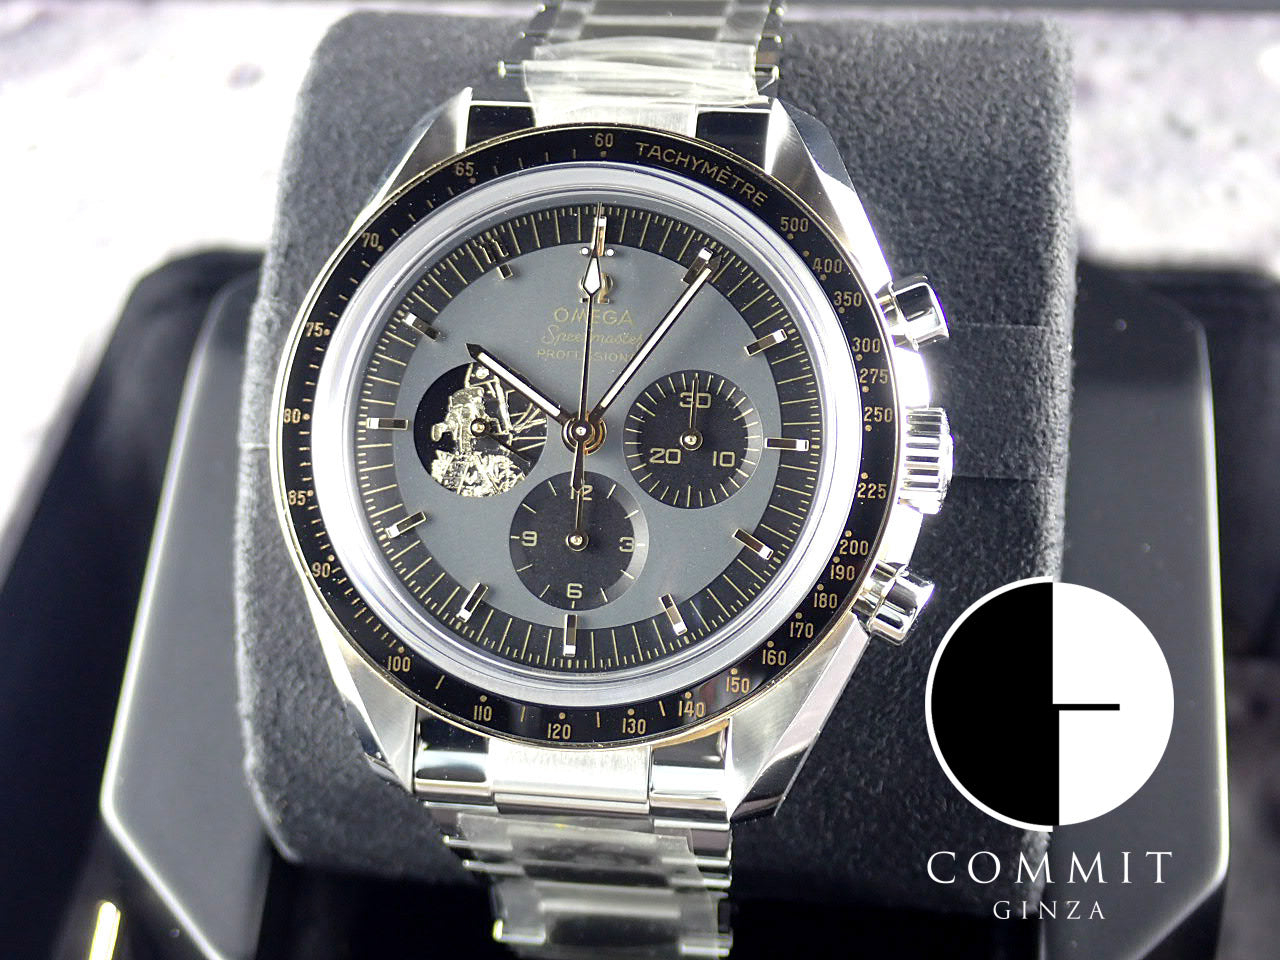 Omega Speedmaster Moonwatch Apollo 11 50th Anniversary Model Limited to 6,969 pieces worldwide &lt;Warranty, box, etc.&gt;